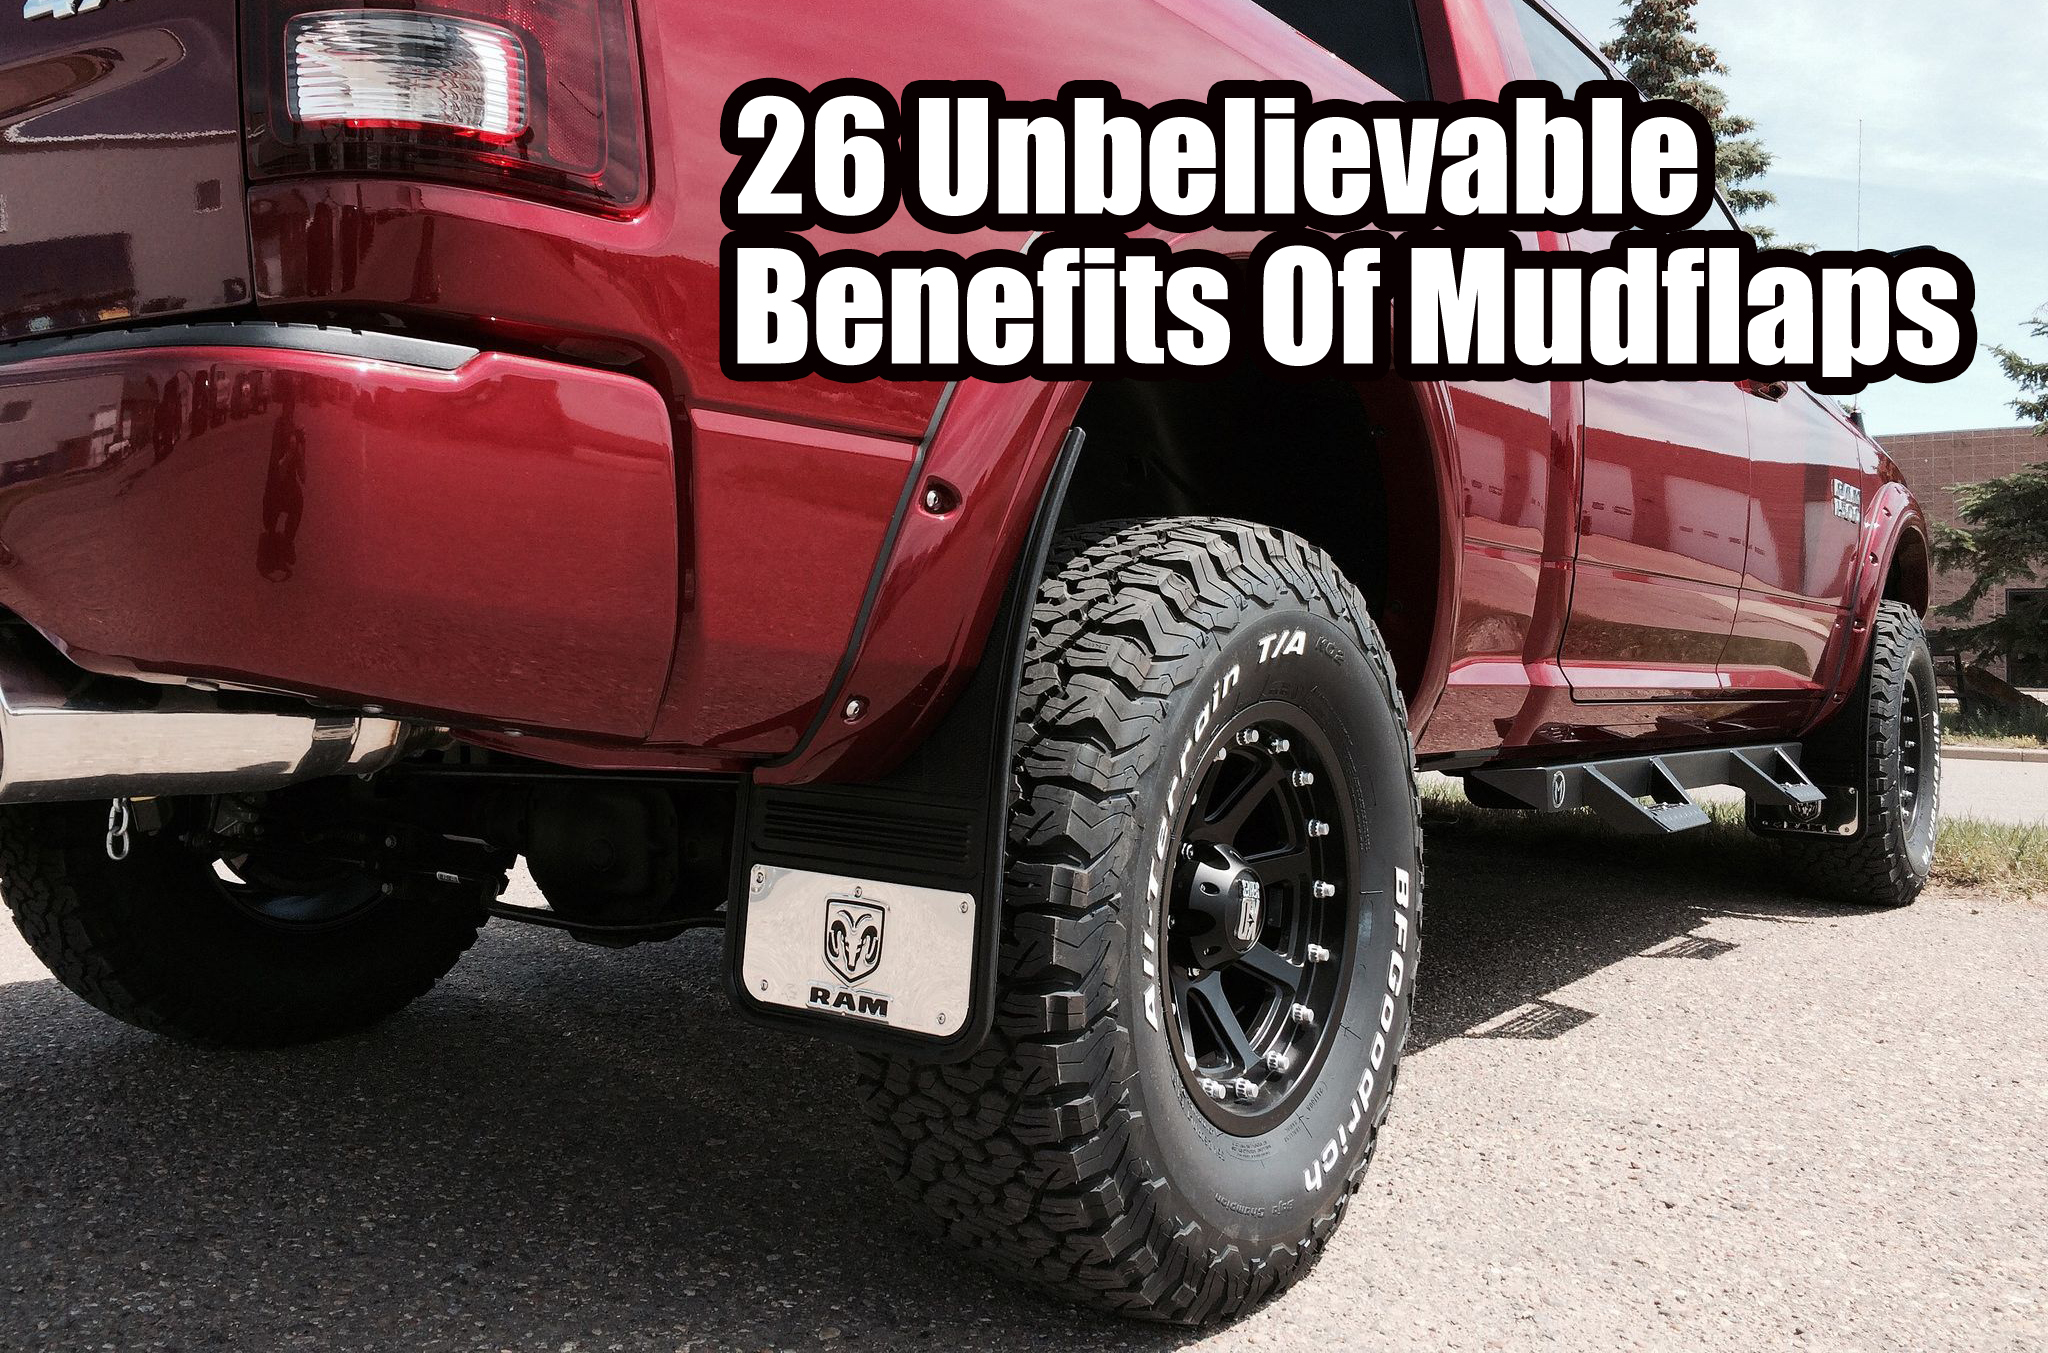 Why Do Trucks Have Mud Flaps